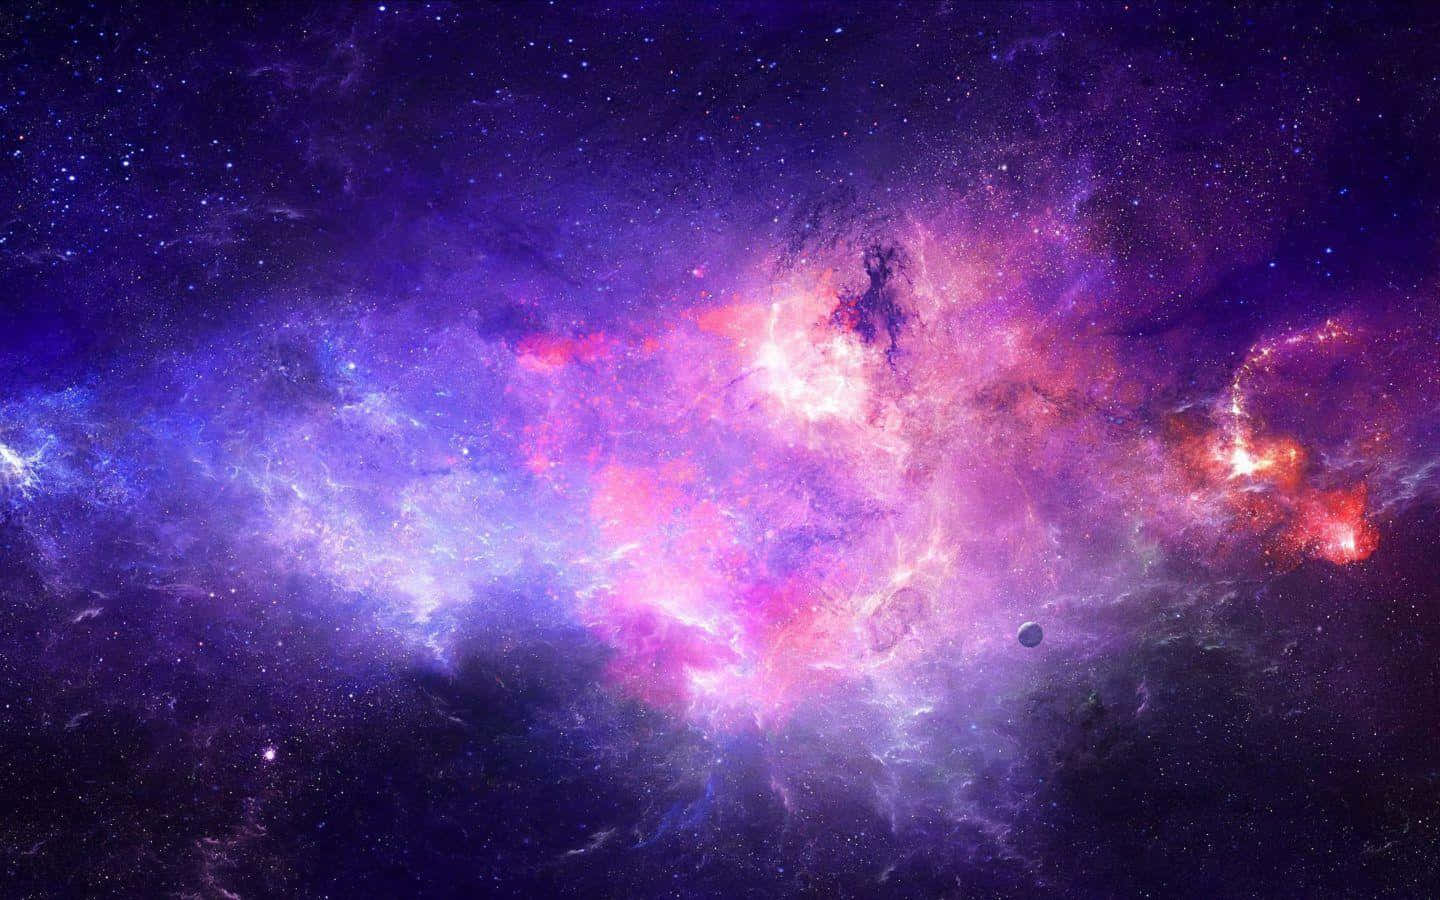 Immerse yourself in the calm beauty of purple space.